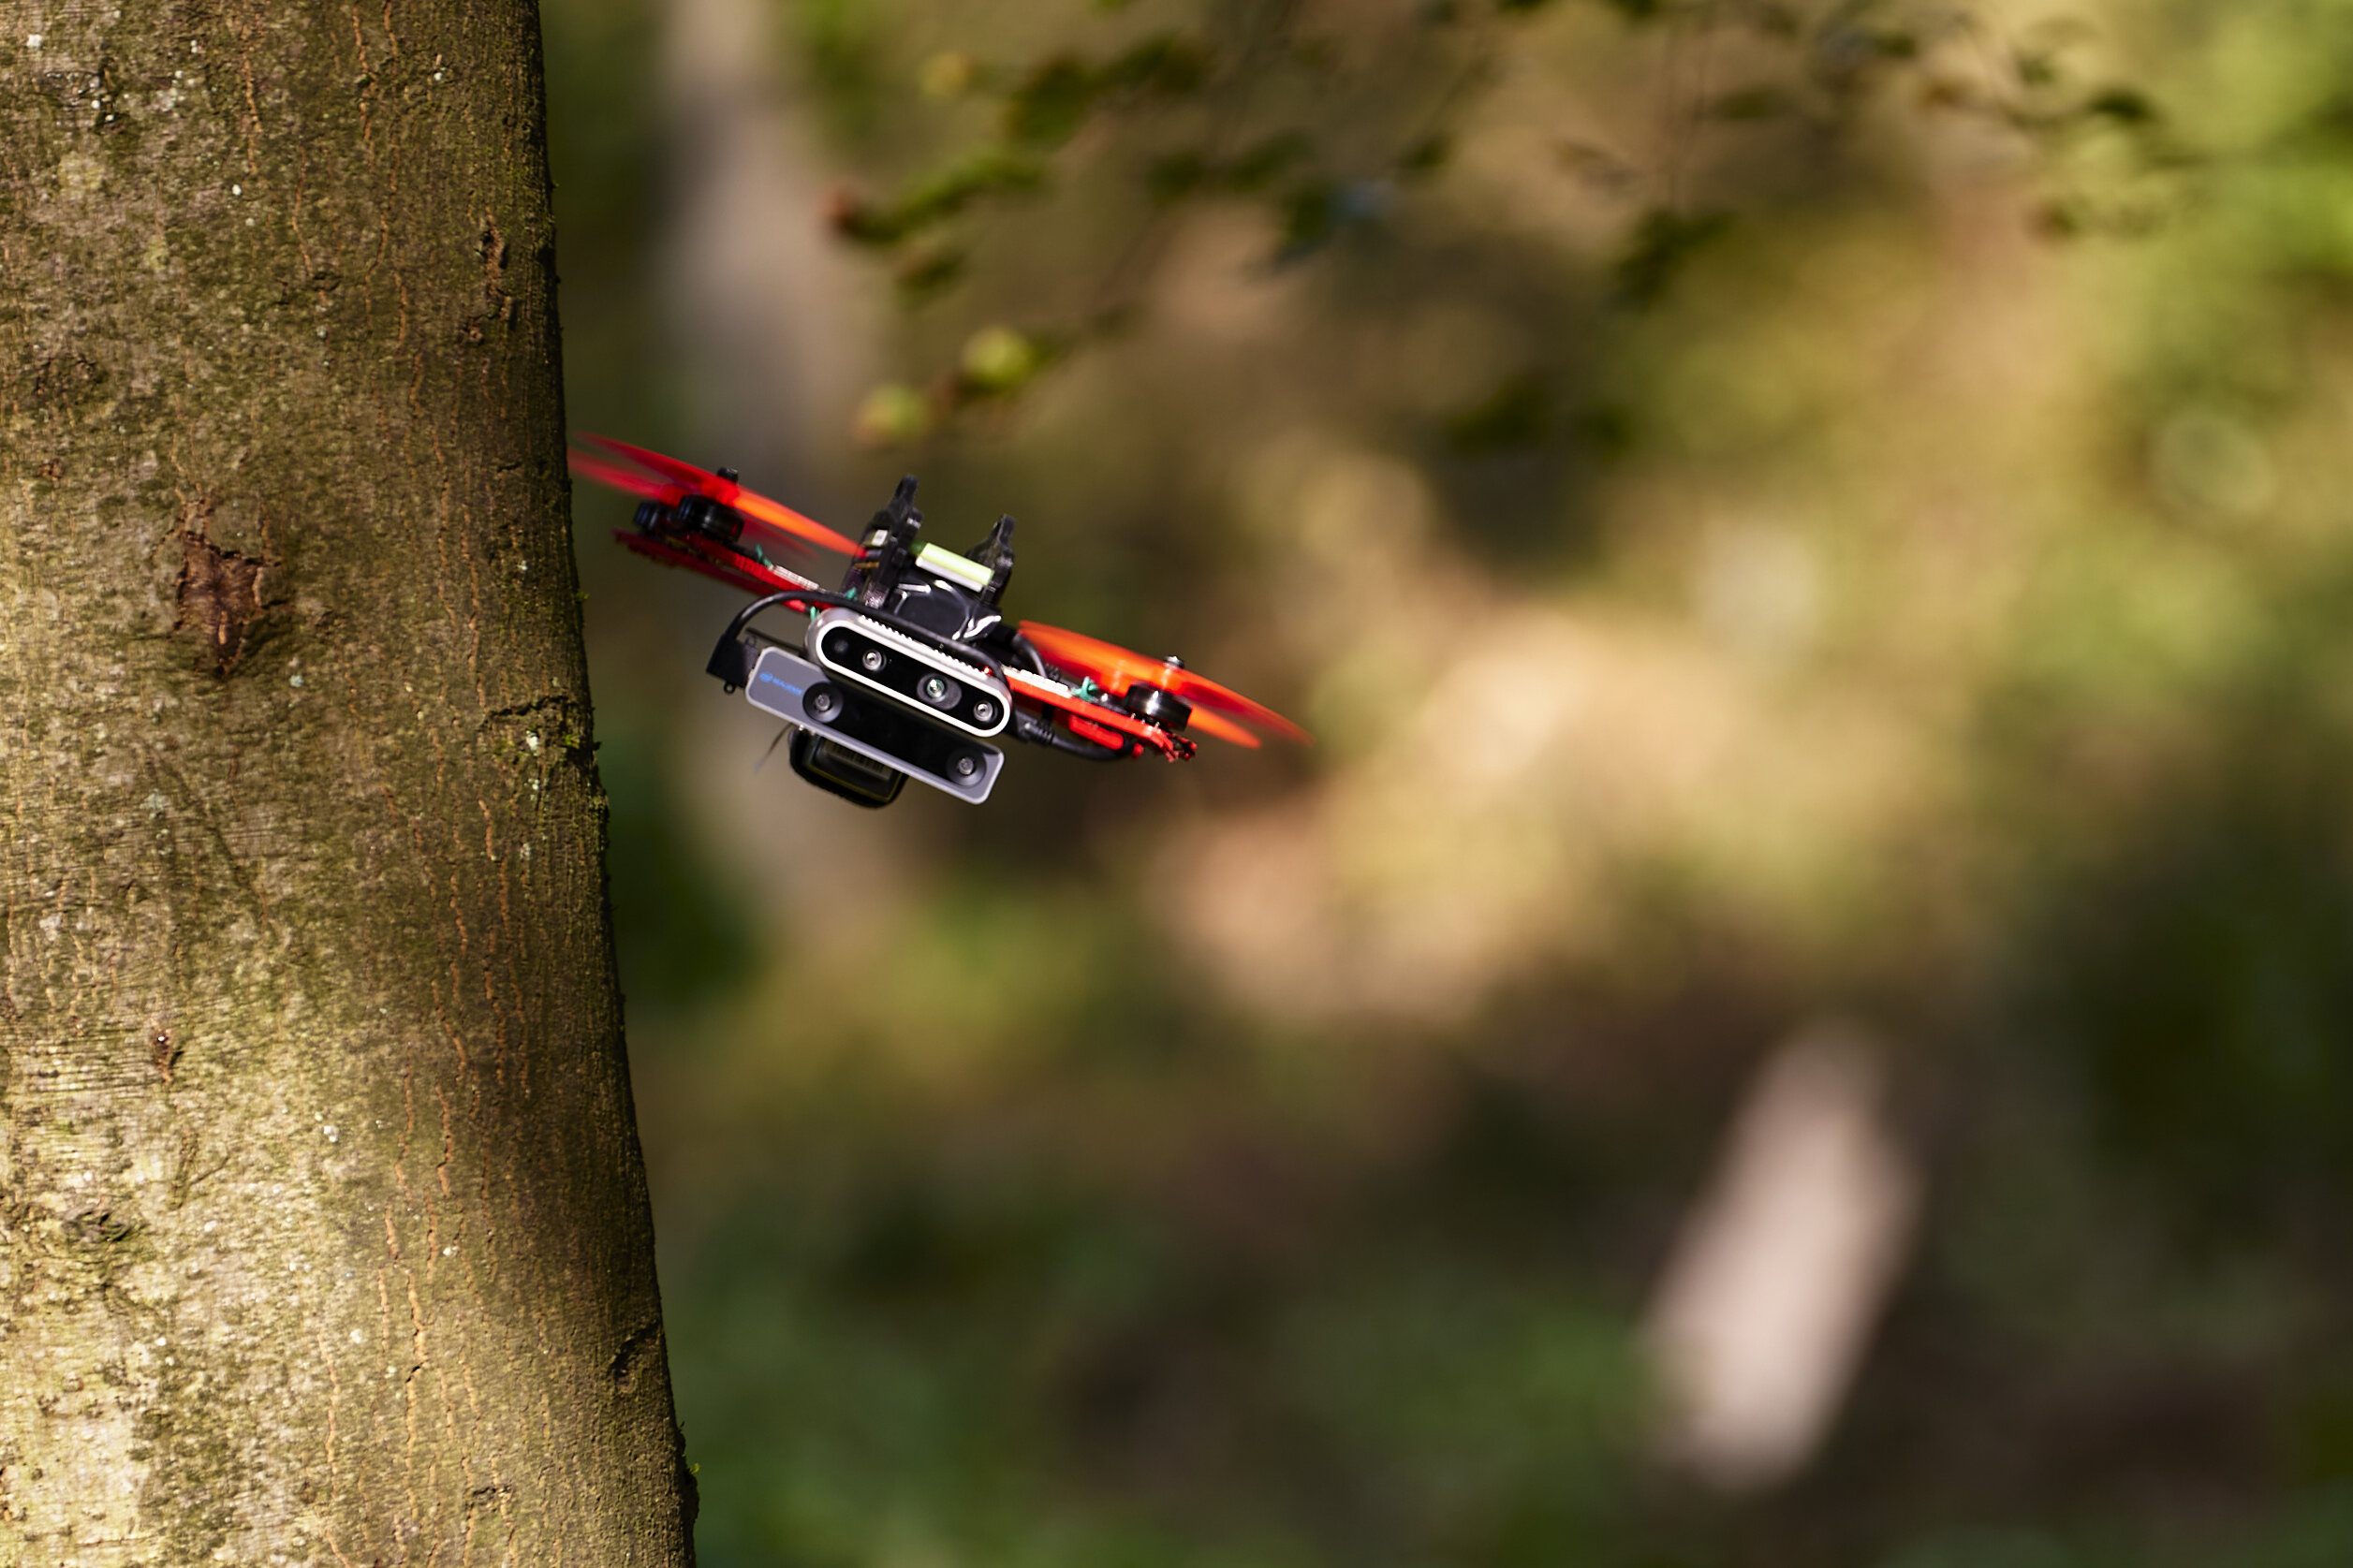 Open-source and open hardware autonomous quadrotor flies fast and avoids obstacles